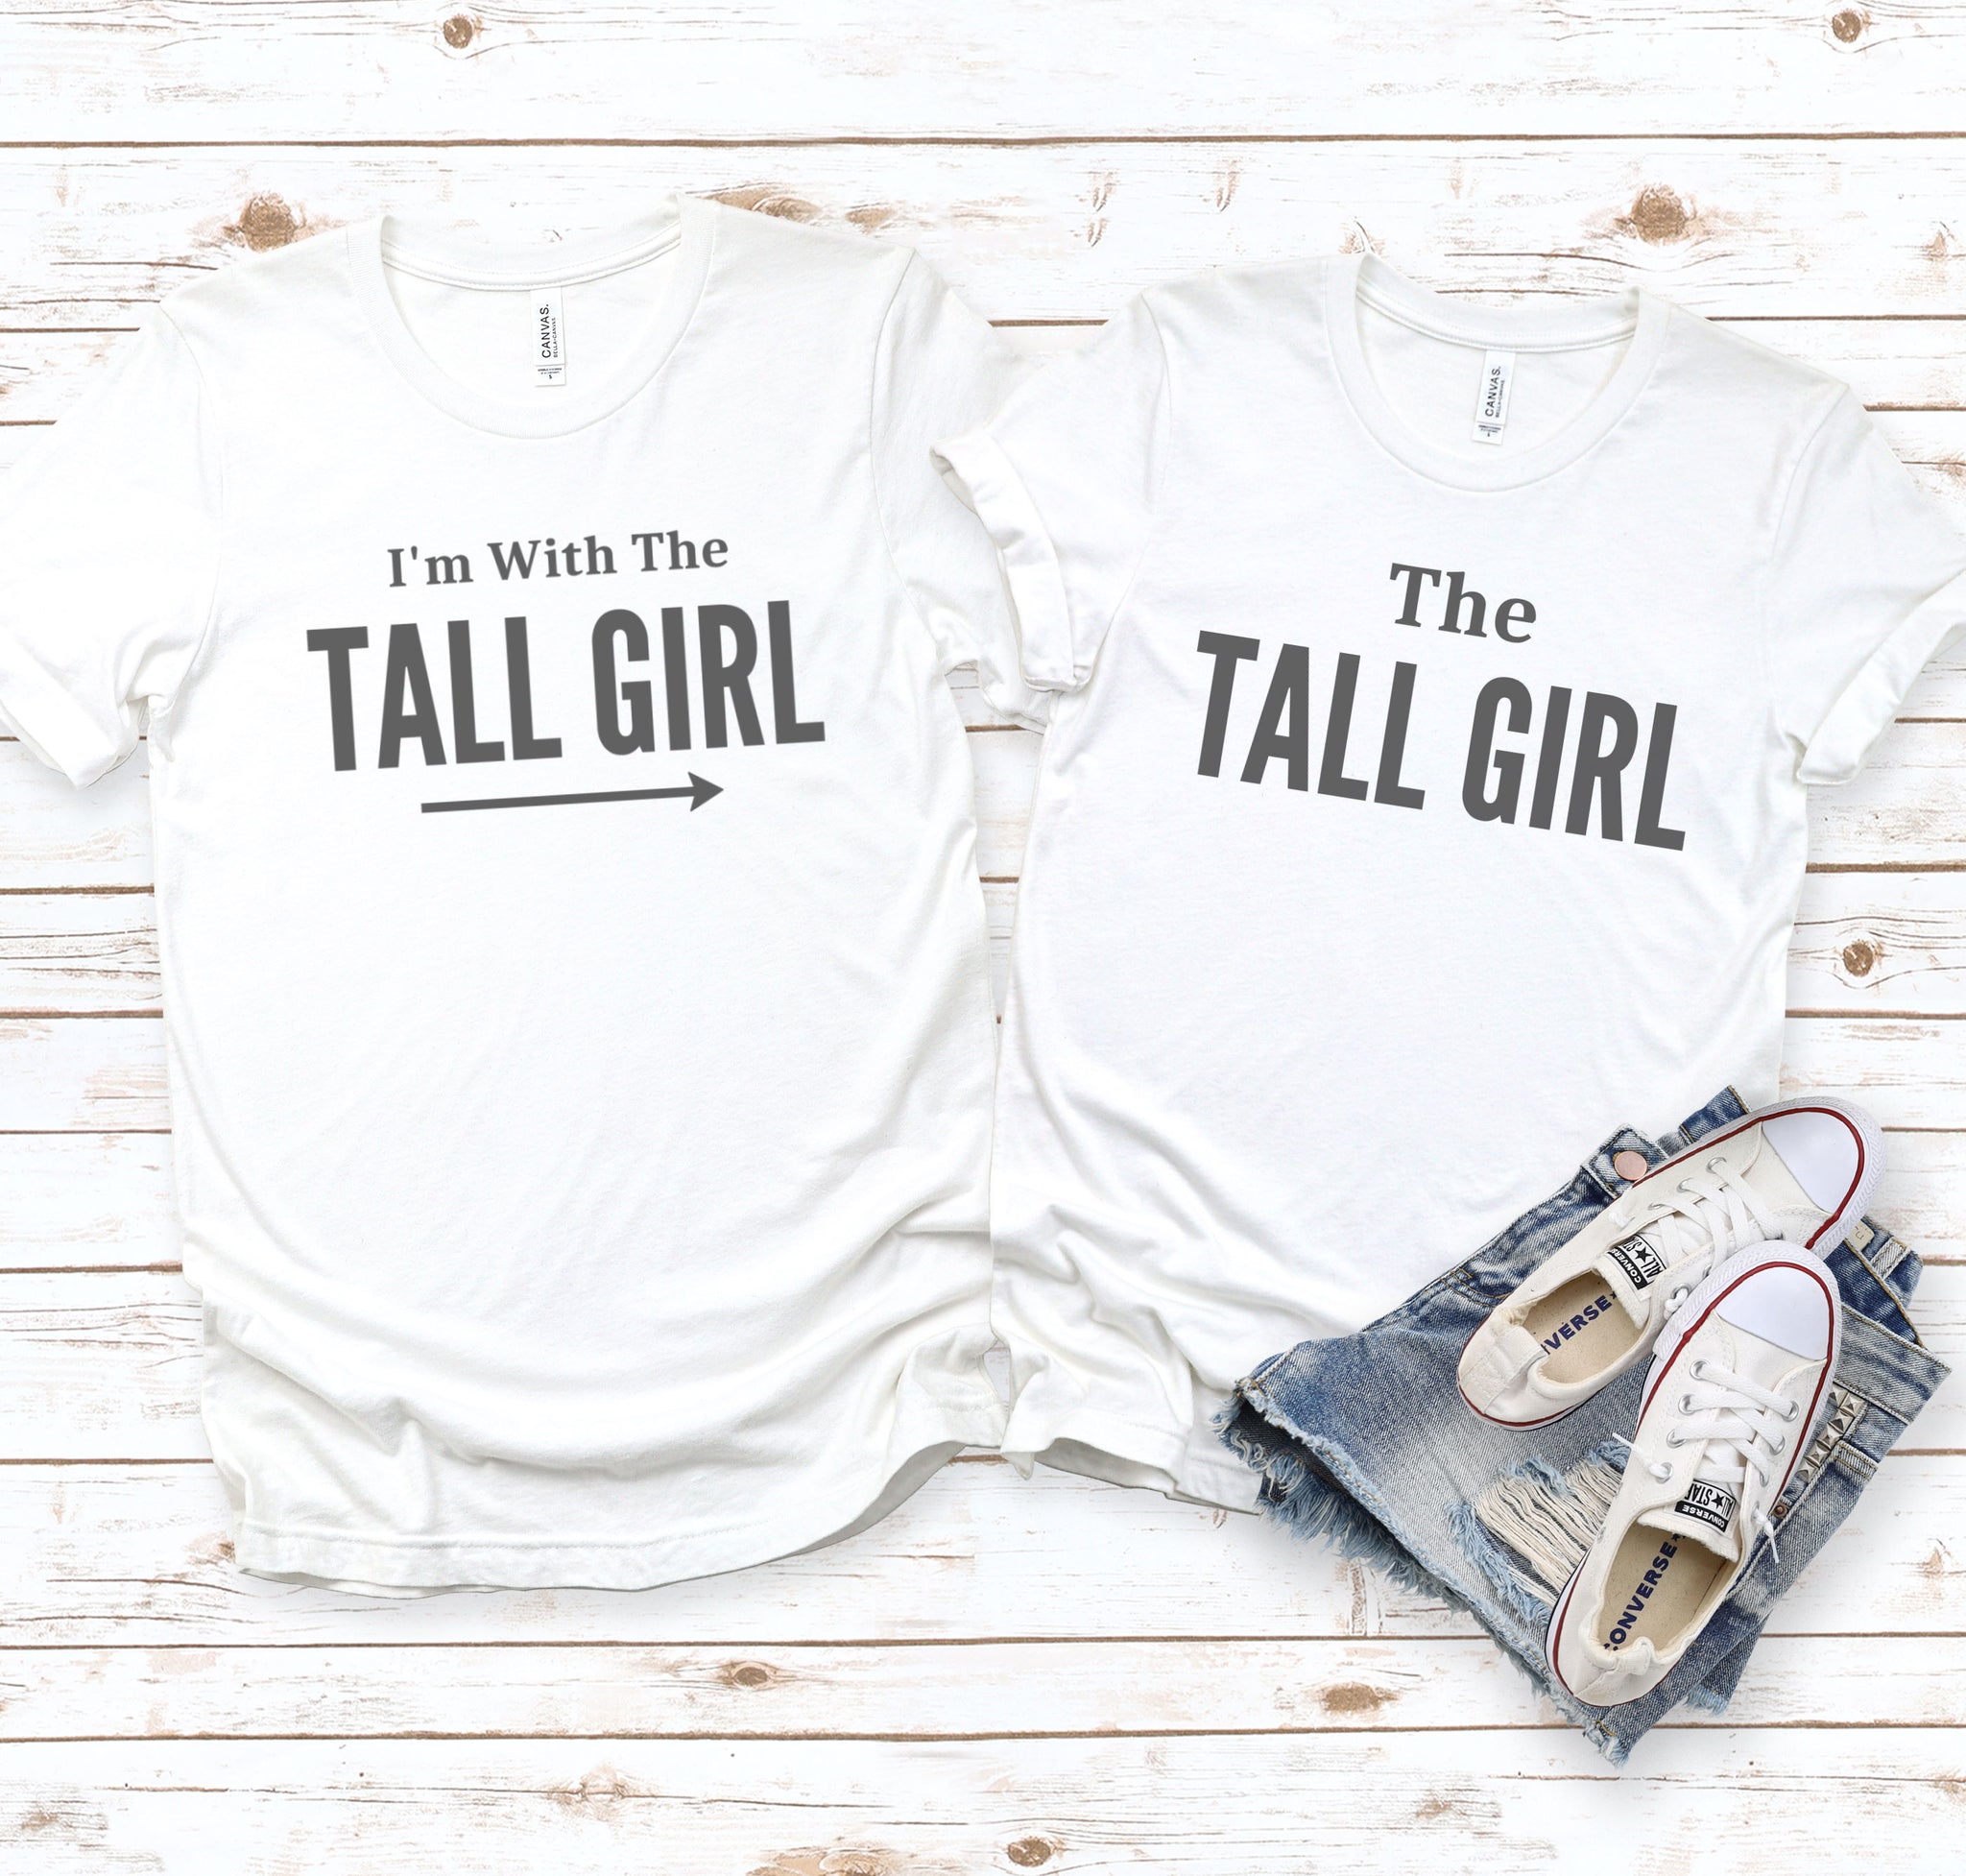 Tall girl couples matching t-shirts.